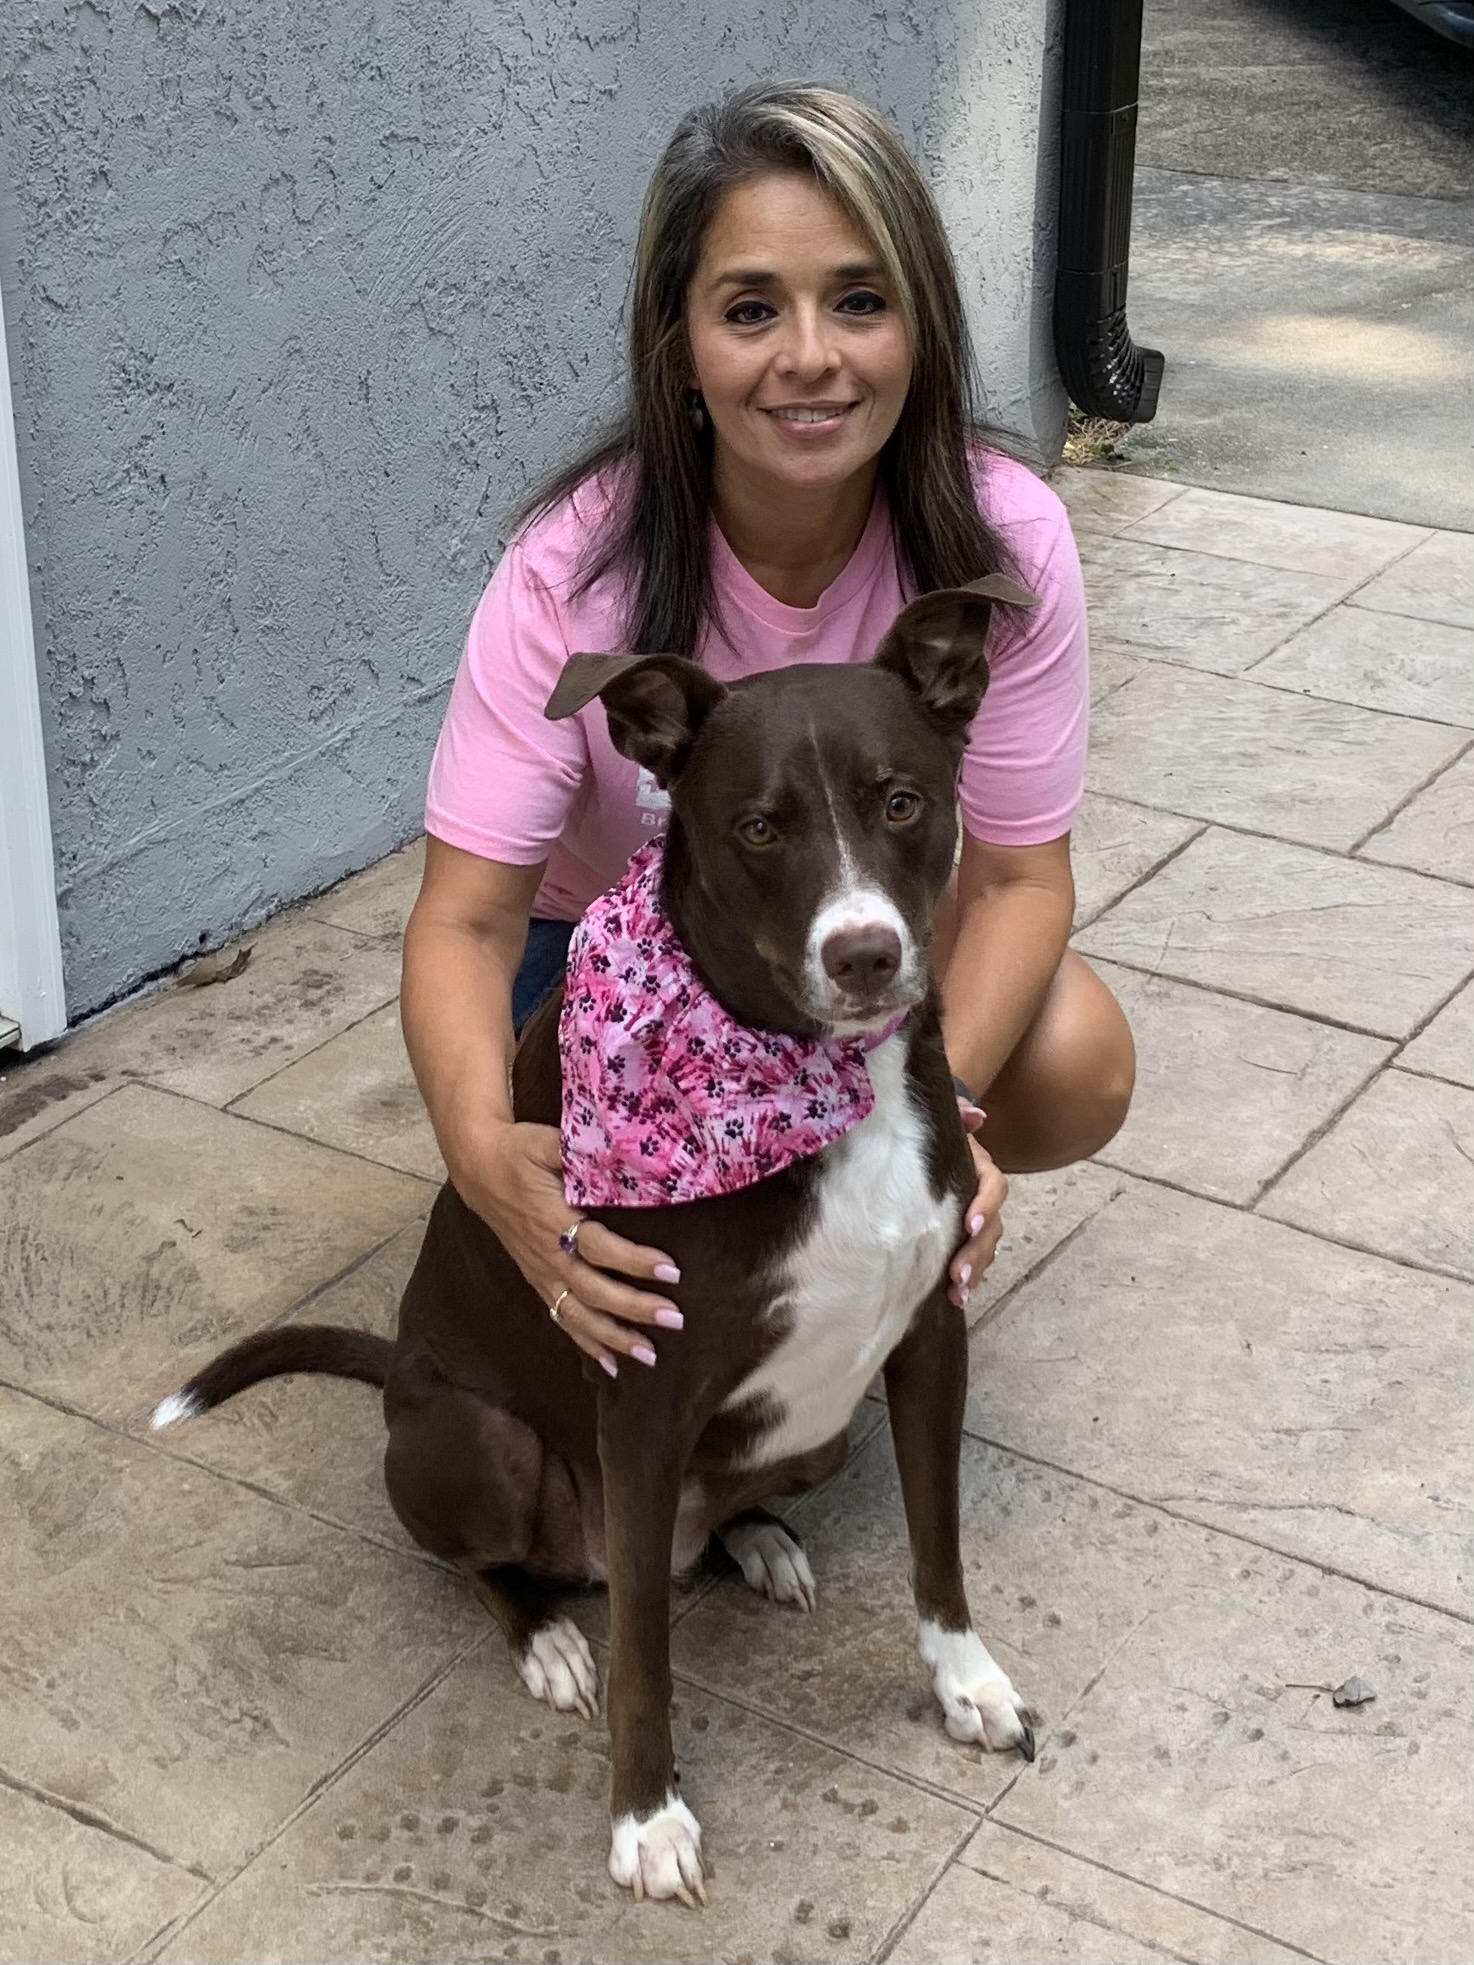 "I support Breast Cancer Awareness for all those who've survived, who've lost their lives and for our future generations. Hoping to knock it out entirely one day."- Lisa Ruiz, Admin Asst - Environmental & Natural Resources 